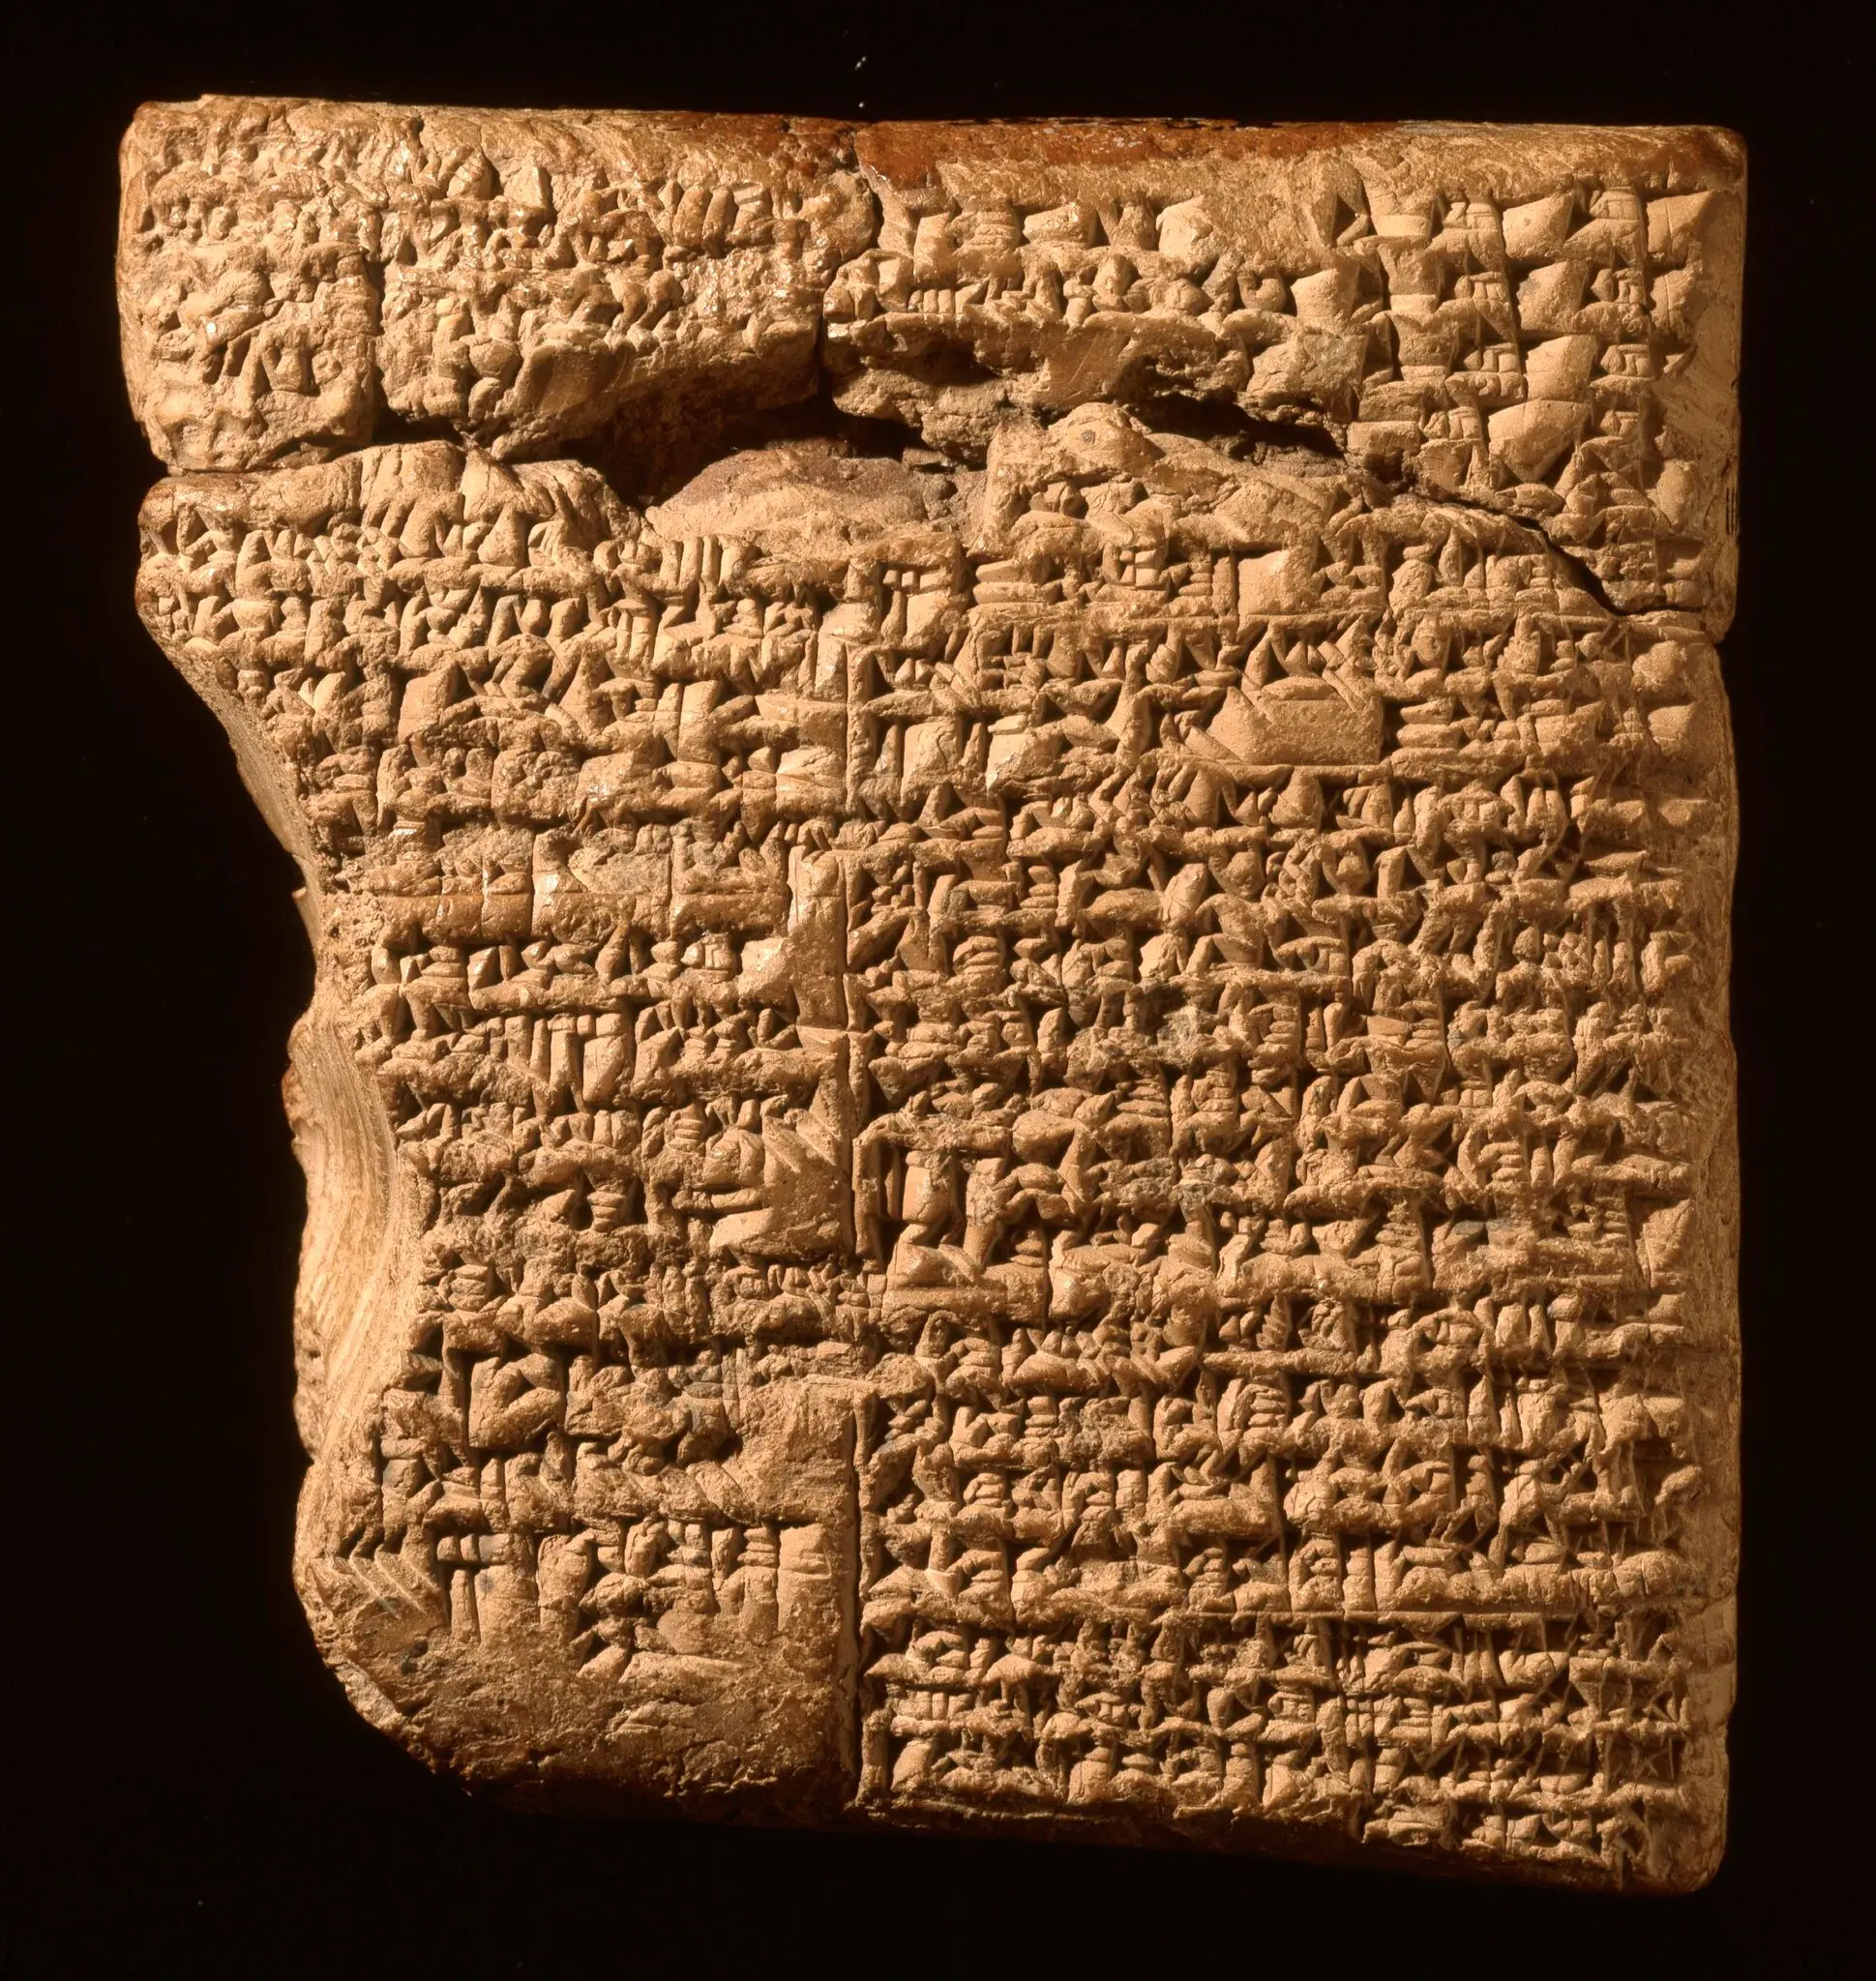 The instructions on how to play the Royal Game of Ur, written in cuneiform on clay. The tablet was written between 177-176 B.C. and translated by Irving Finkel of the British Museum.Credit...BritishMuseum.org, via Wikimedia Commons